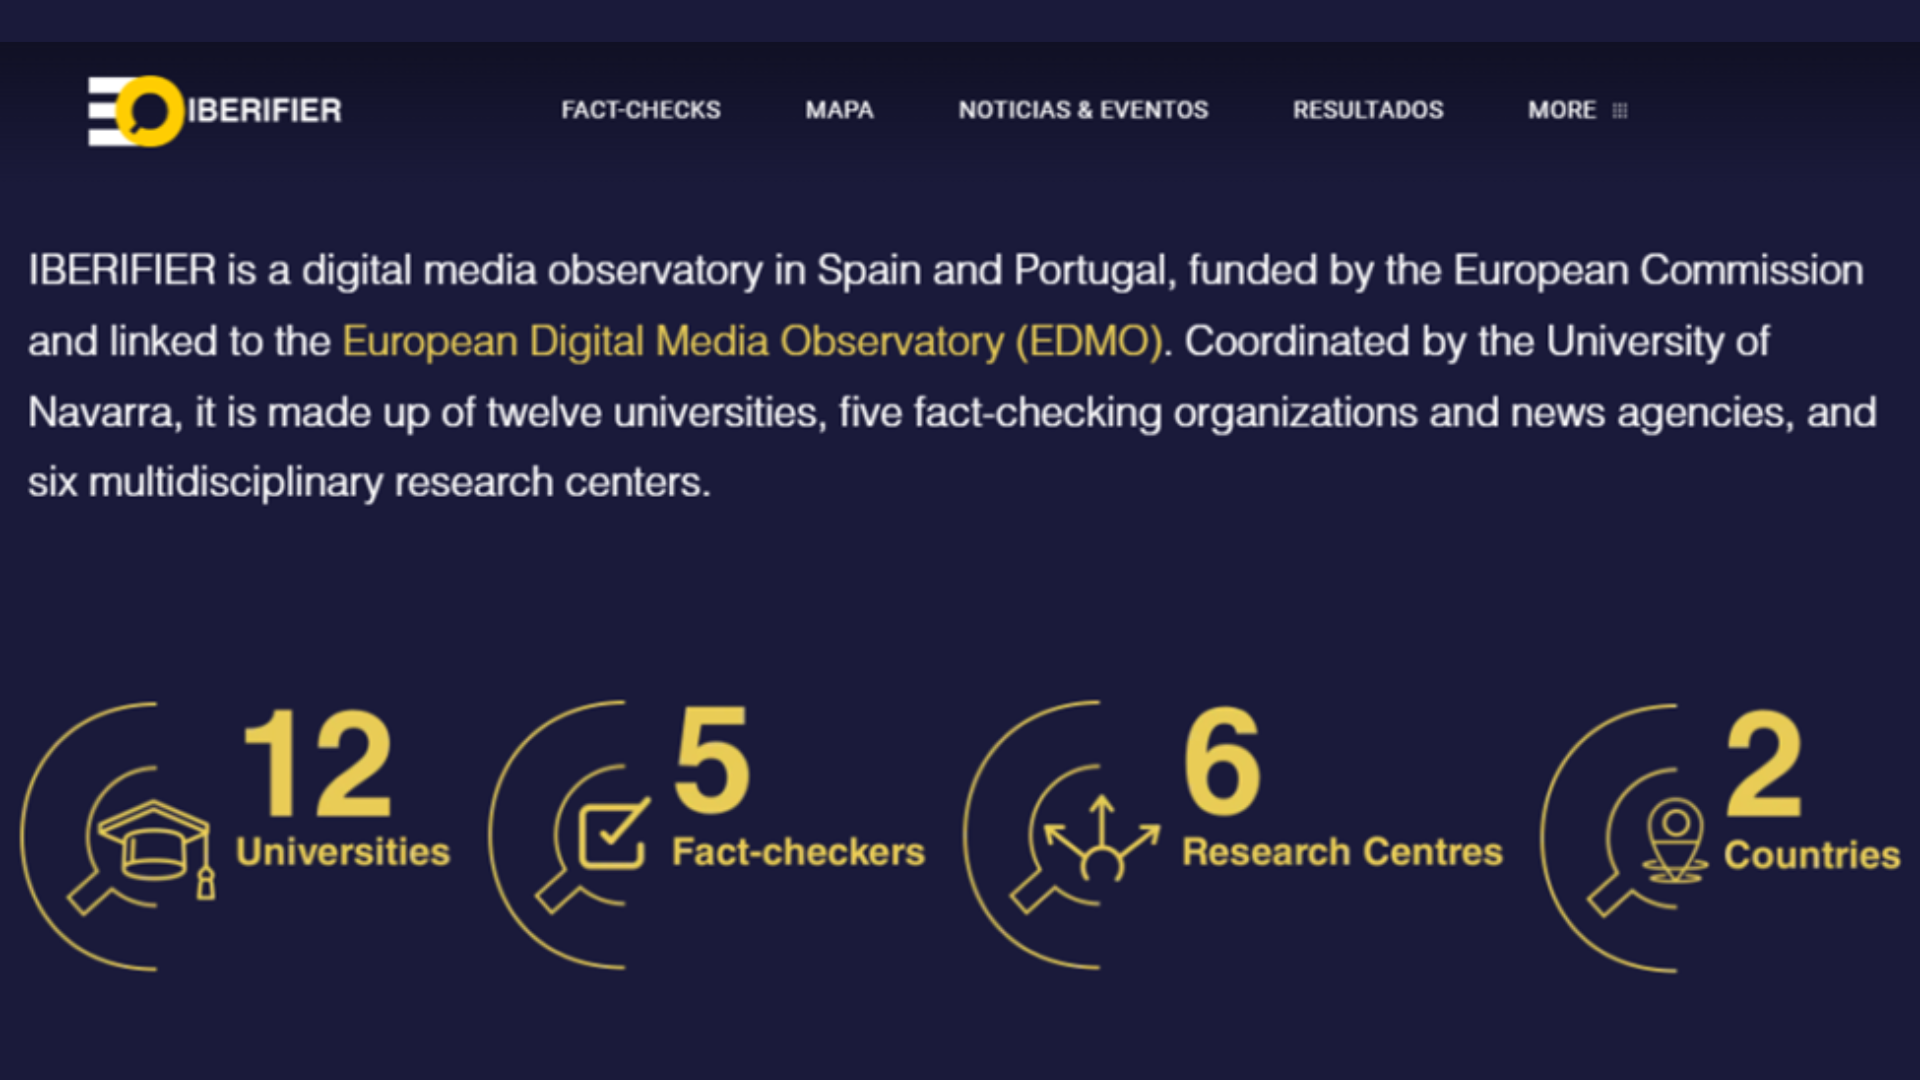 IBERIFIER, Digitial Media Observatory in Spain and Portugal, Charo Sádaba Chalezquer, School of Communication, Univesity of Navarra, Spain and Vitor Tomé, ISCTE-University Institute of Lisbon, Portugal